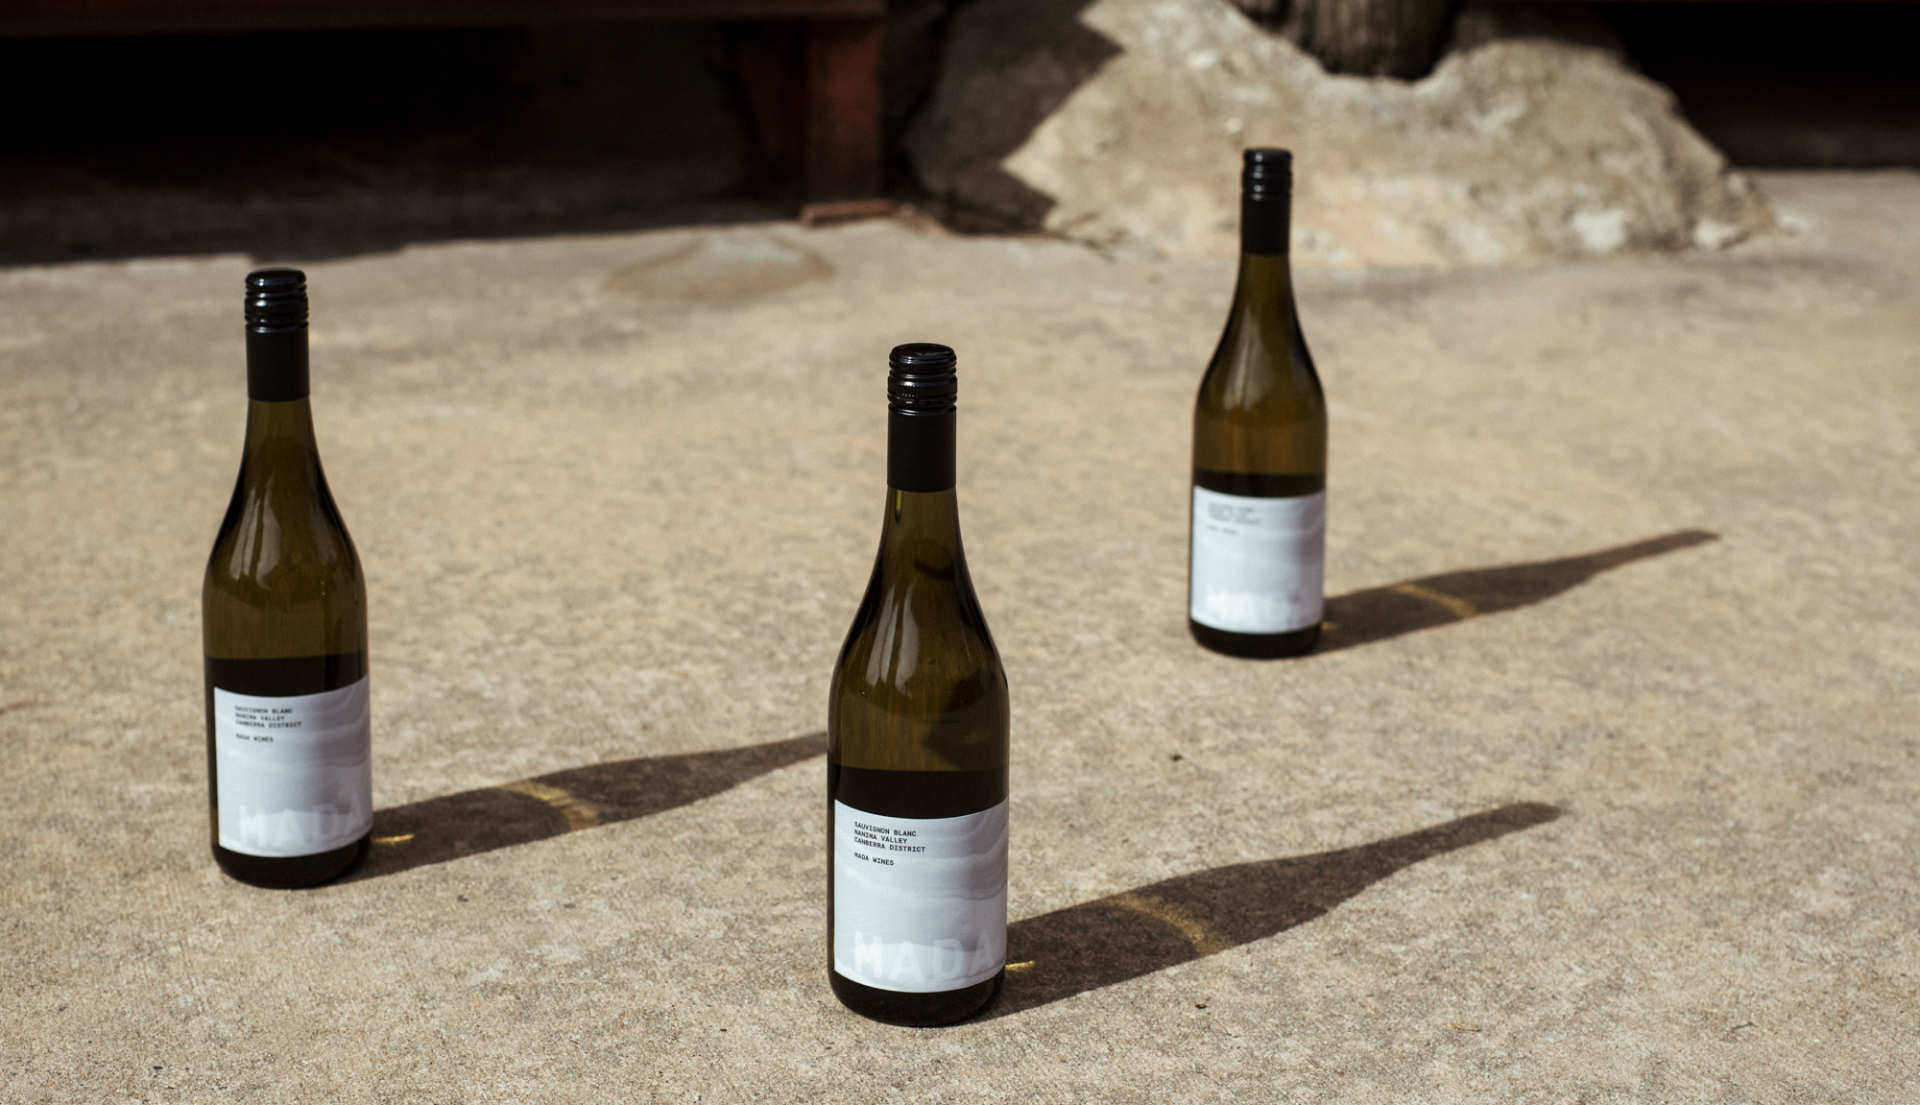 Three wine bottles on stone/concrete. Wine bottles are casting long shadows.